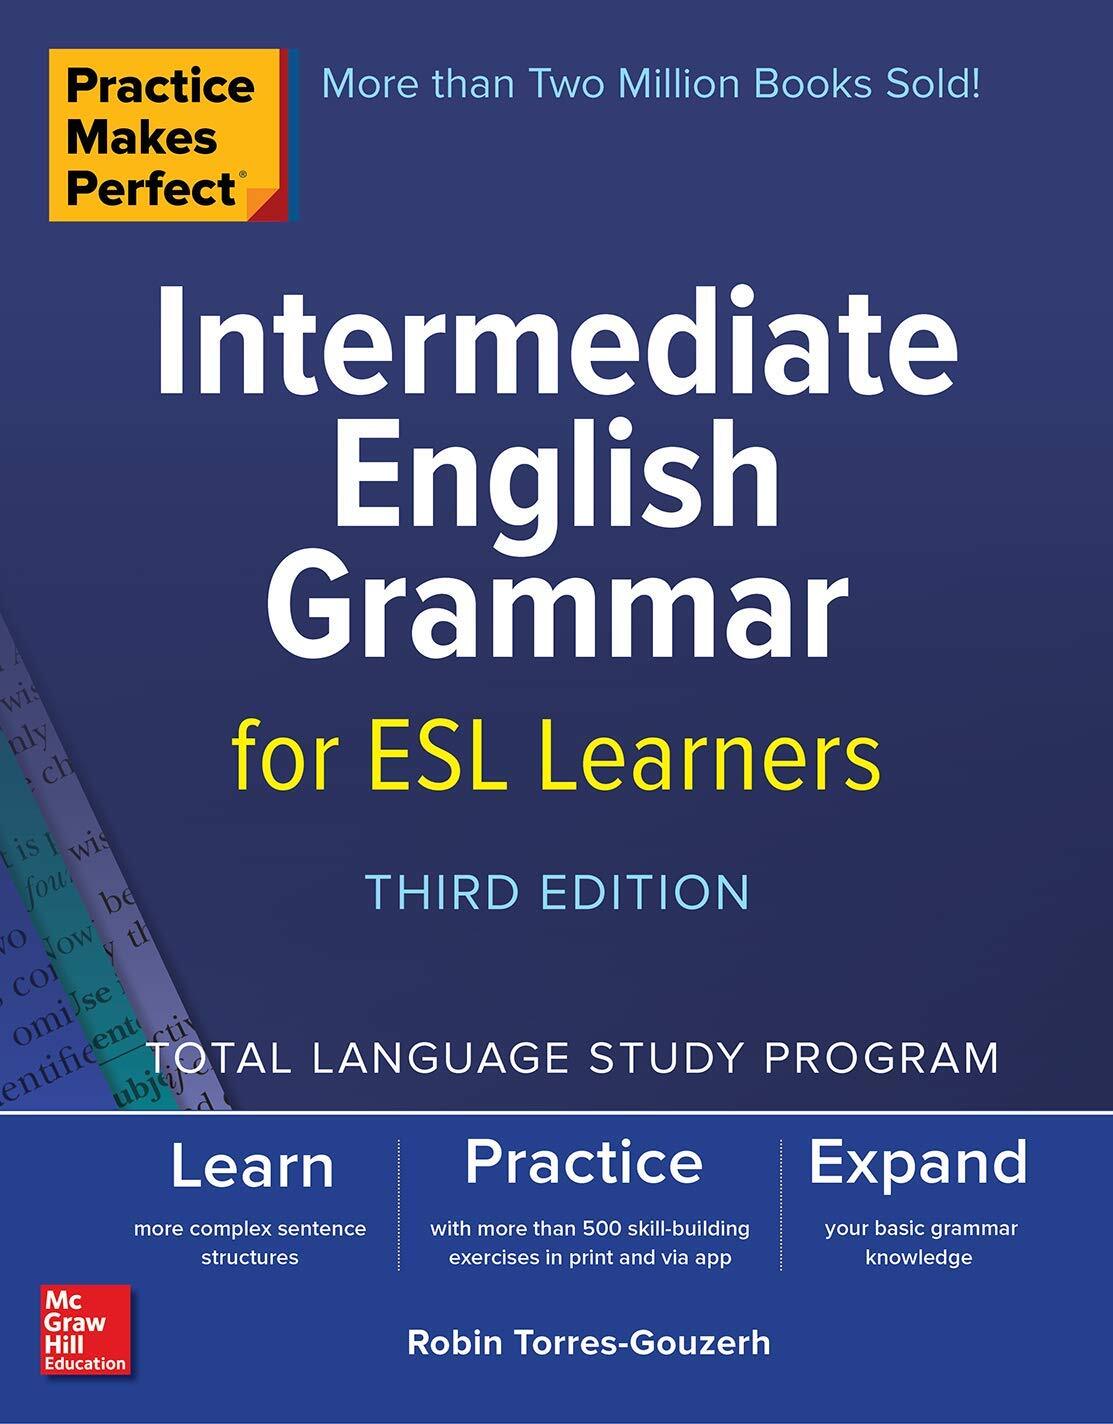 Practice Makes Perfect: Intermediate English Grammar for ESL Learners